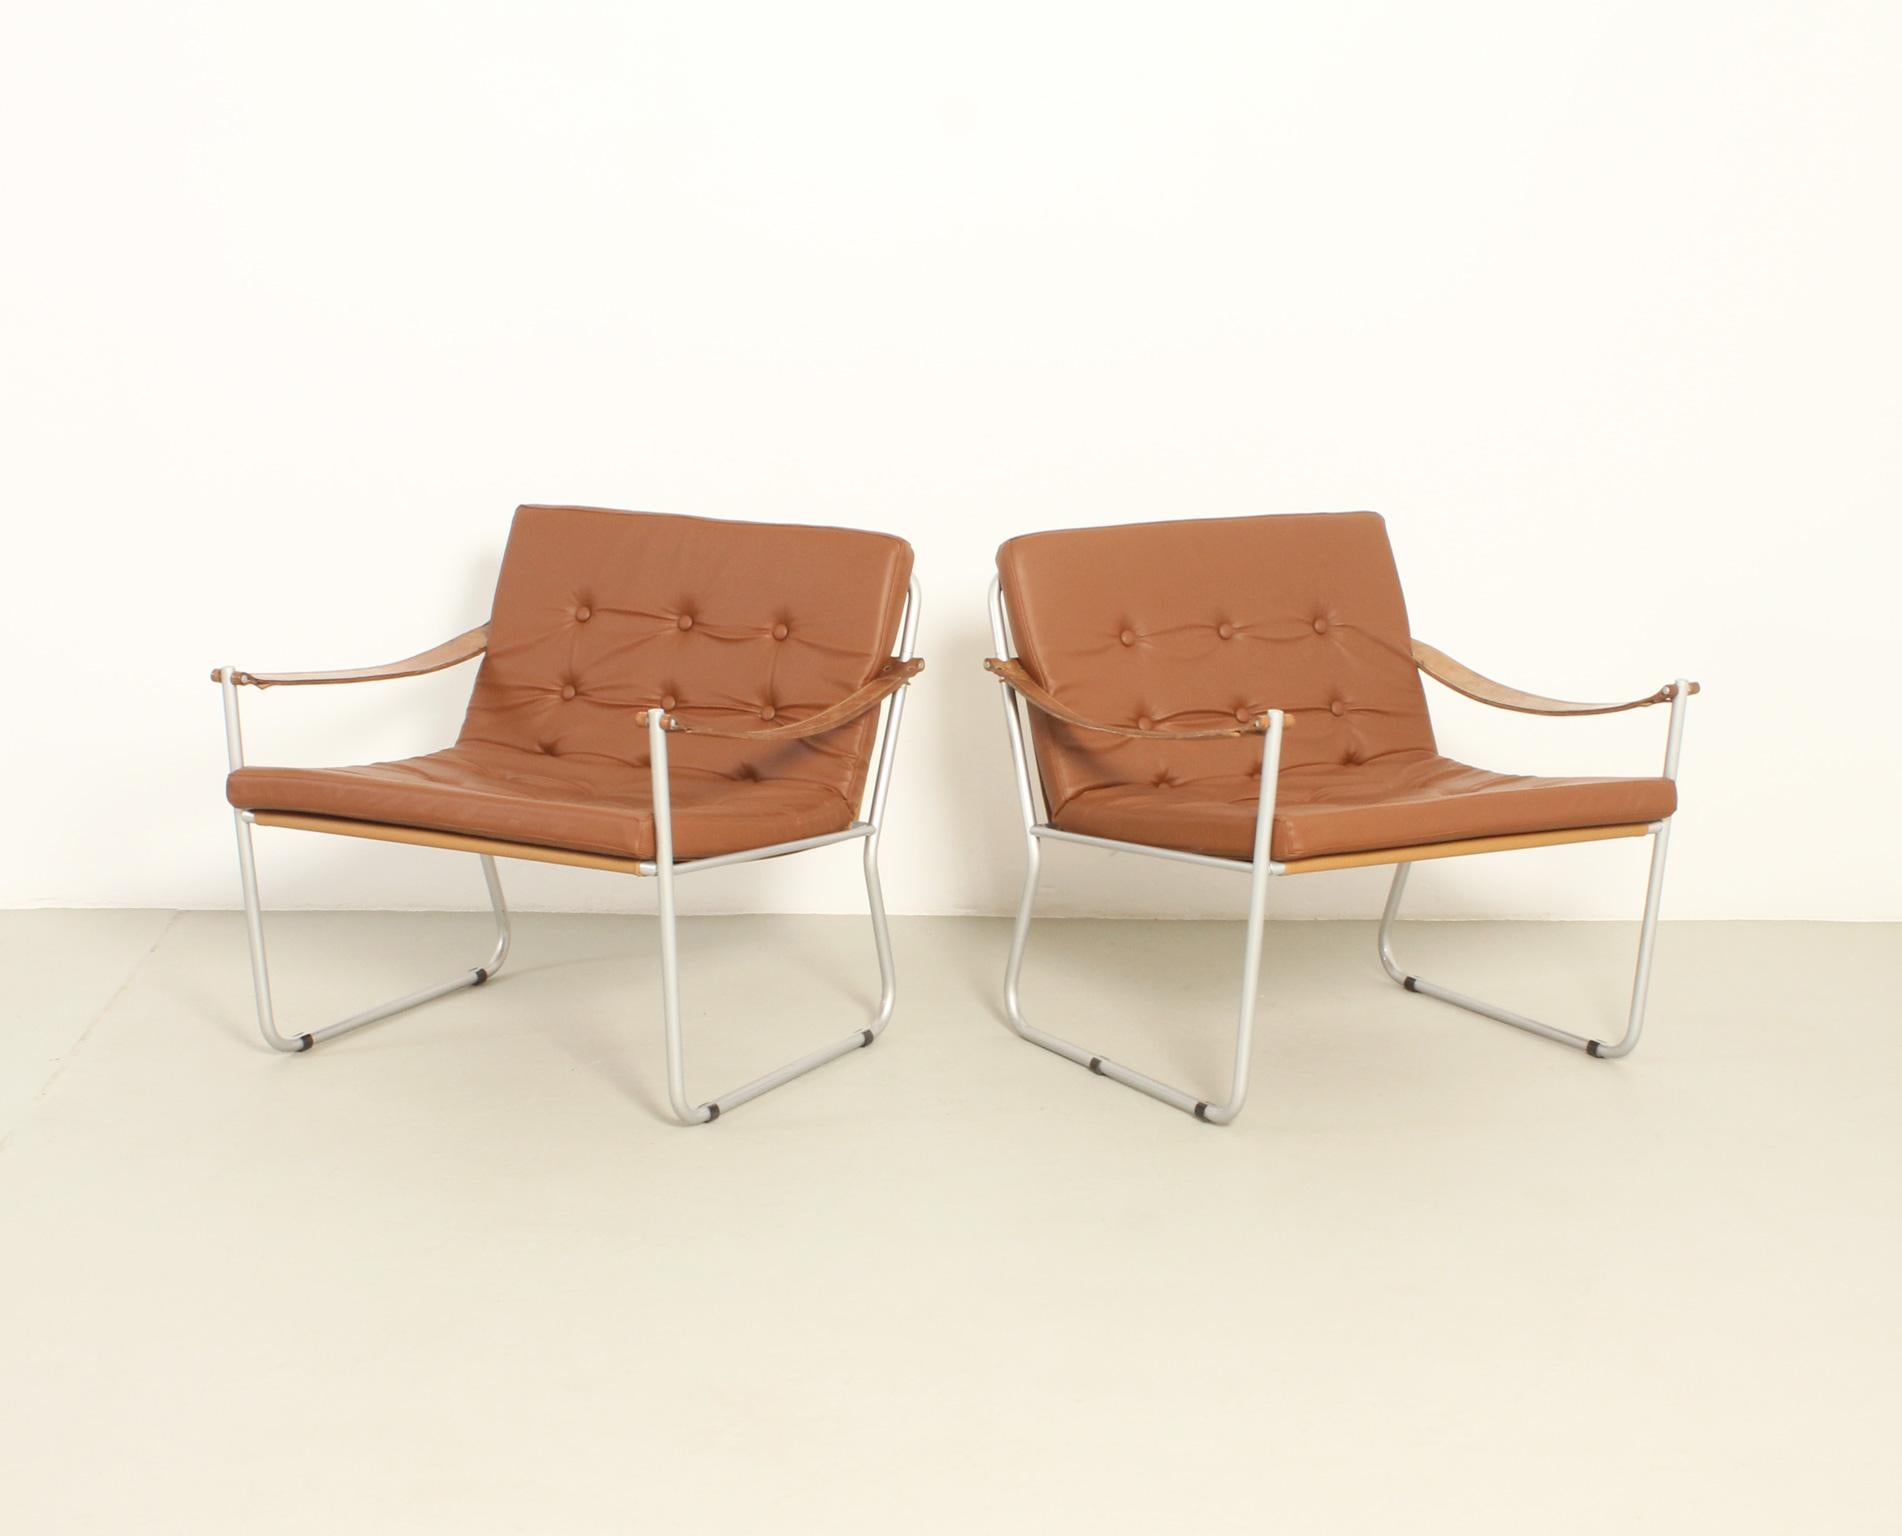 Pair of Safari Style Armchairs with Leather Straps Arm Rests, 1960's For Sale 2